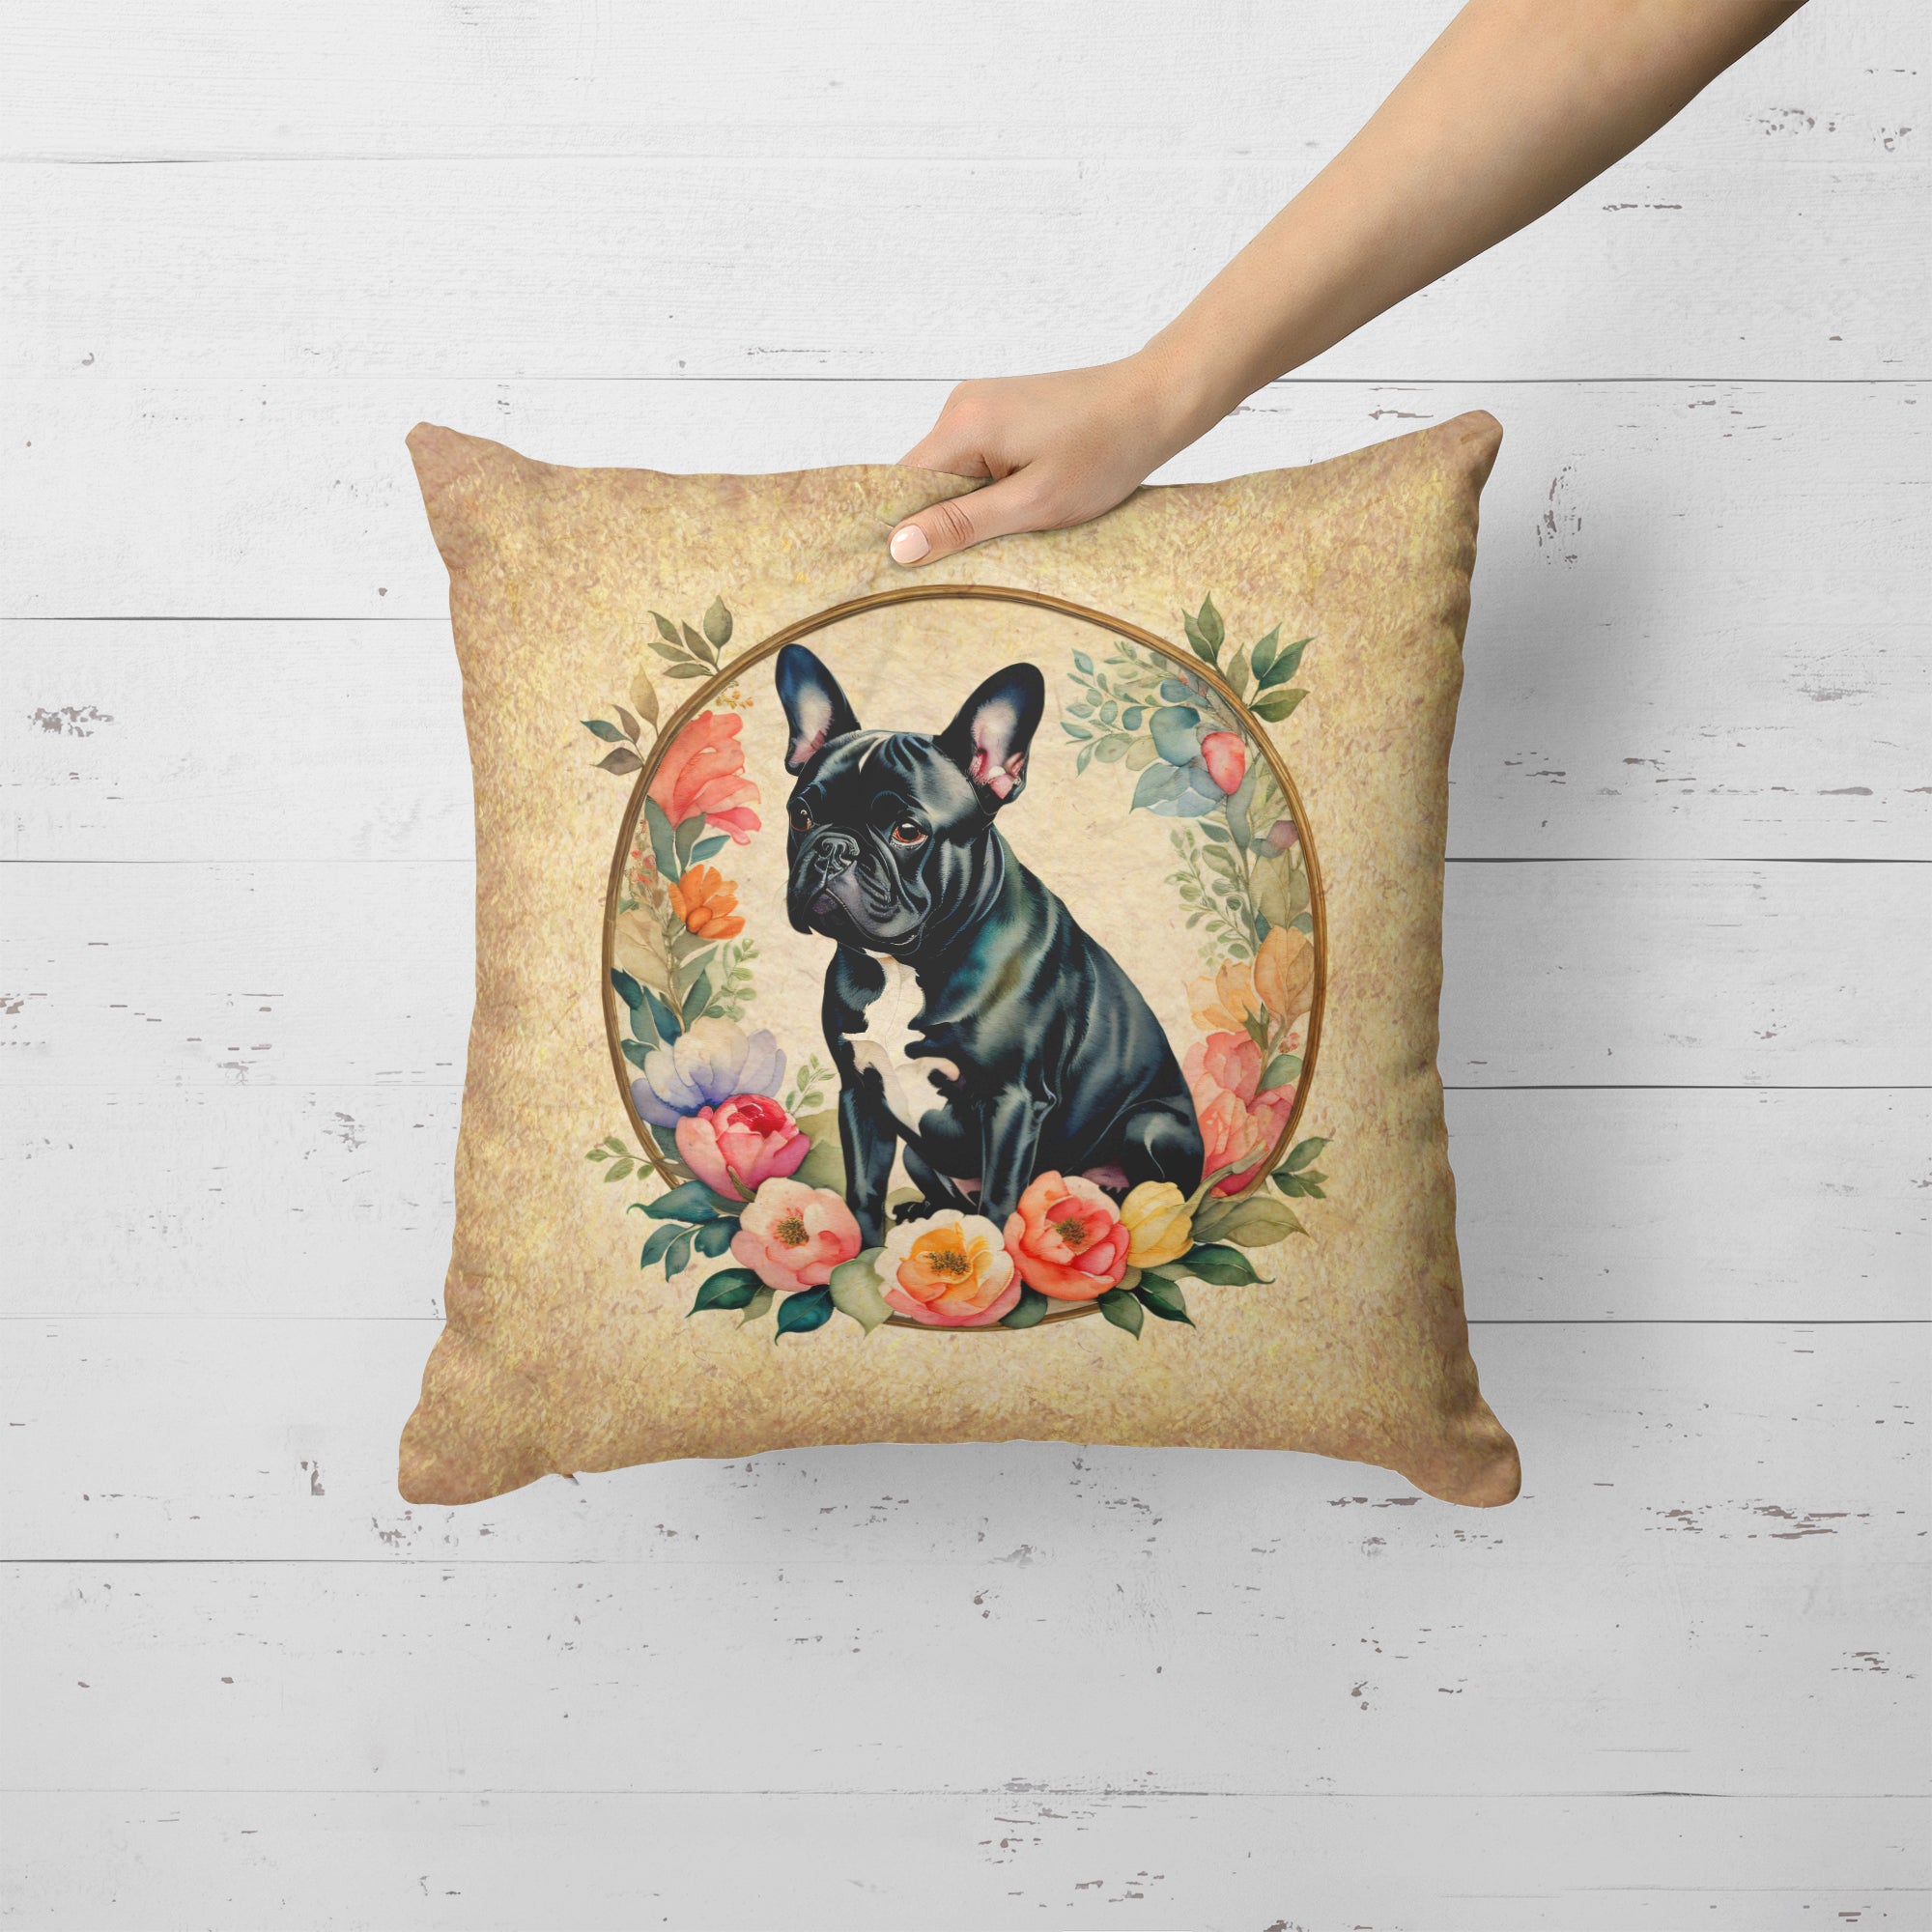 Buy this Black French Bulldog and Flowers Fabric Decorative Pillow